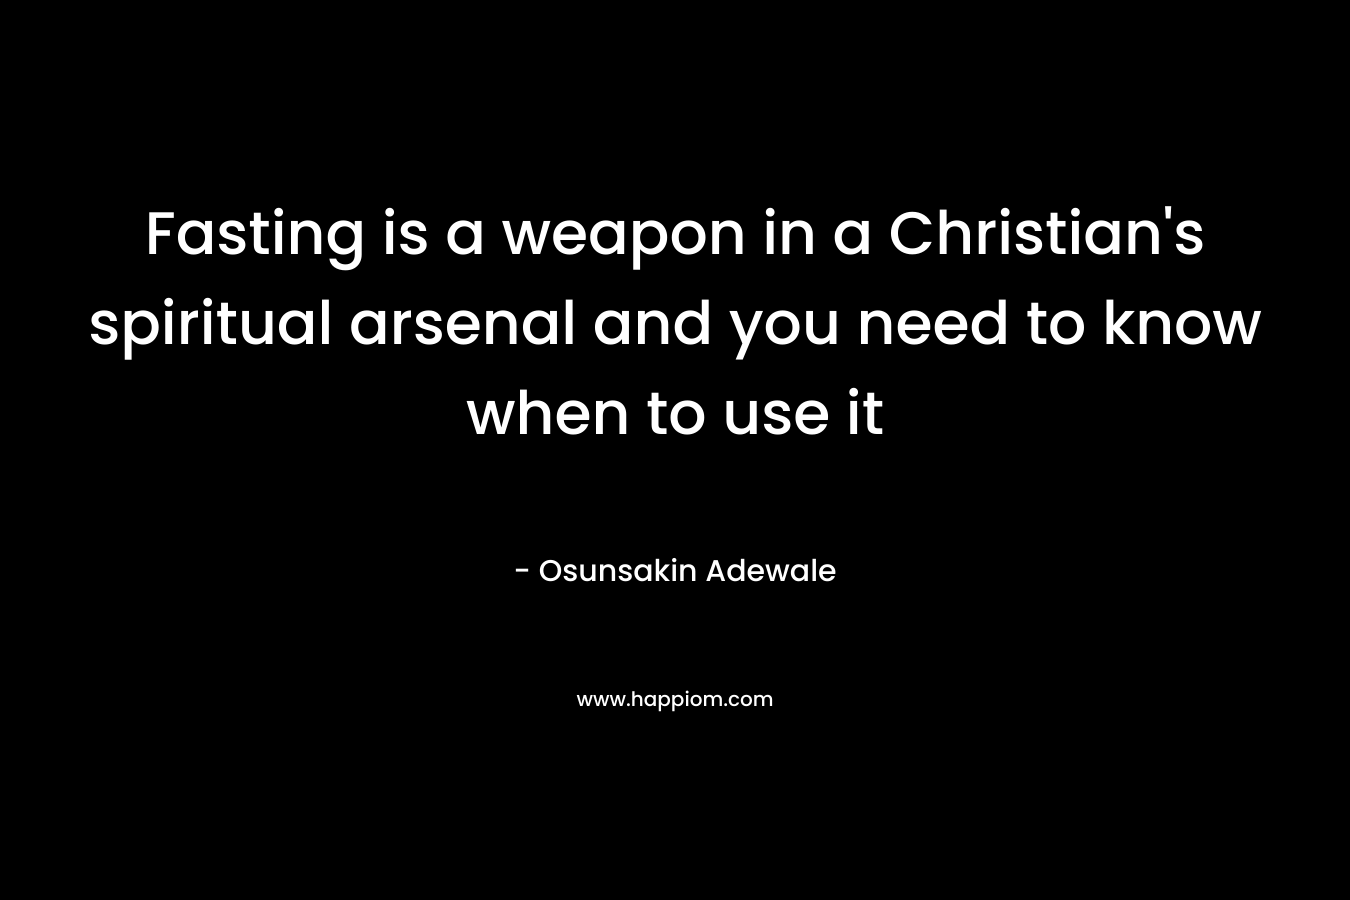 Fasting is a weapon in a Christian's spiritual arsenal and you need to know when to use it